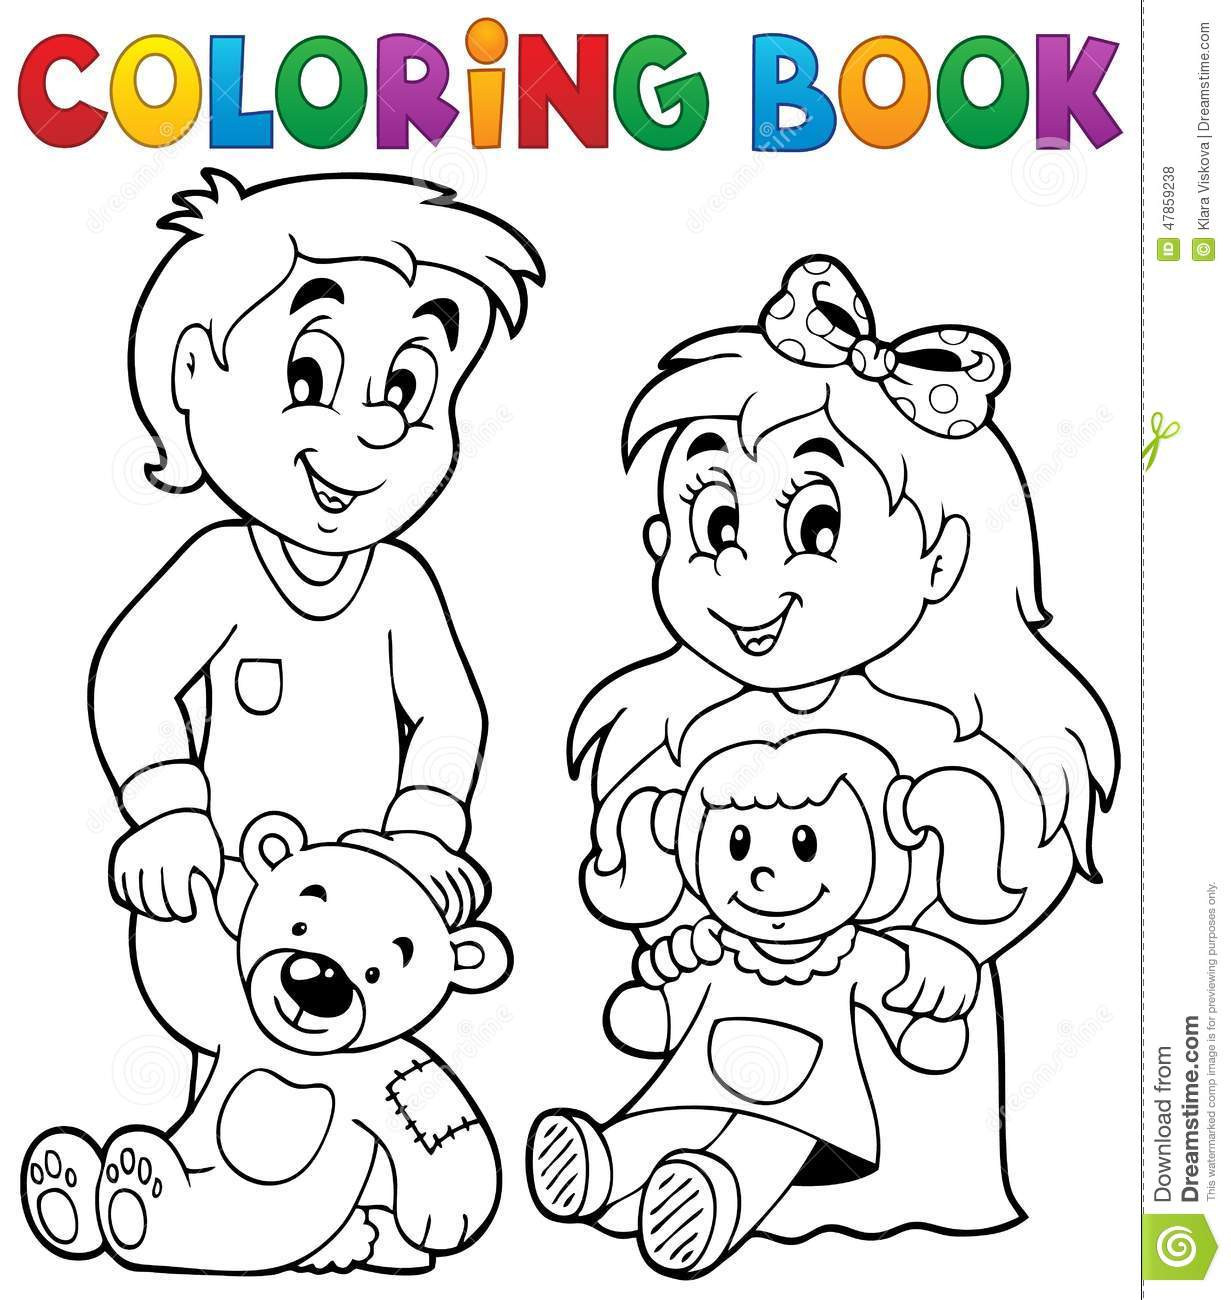 Coloring Books For Toddler
 Coloring Book Children With Toys 1 Stock Vector Image